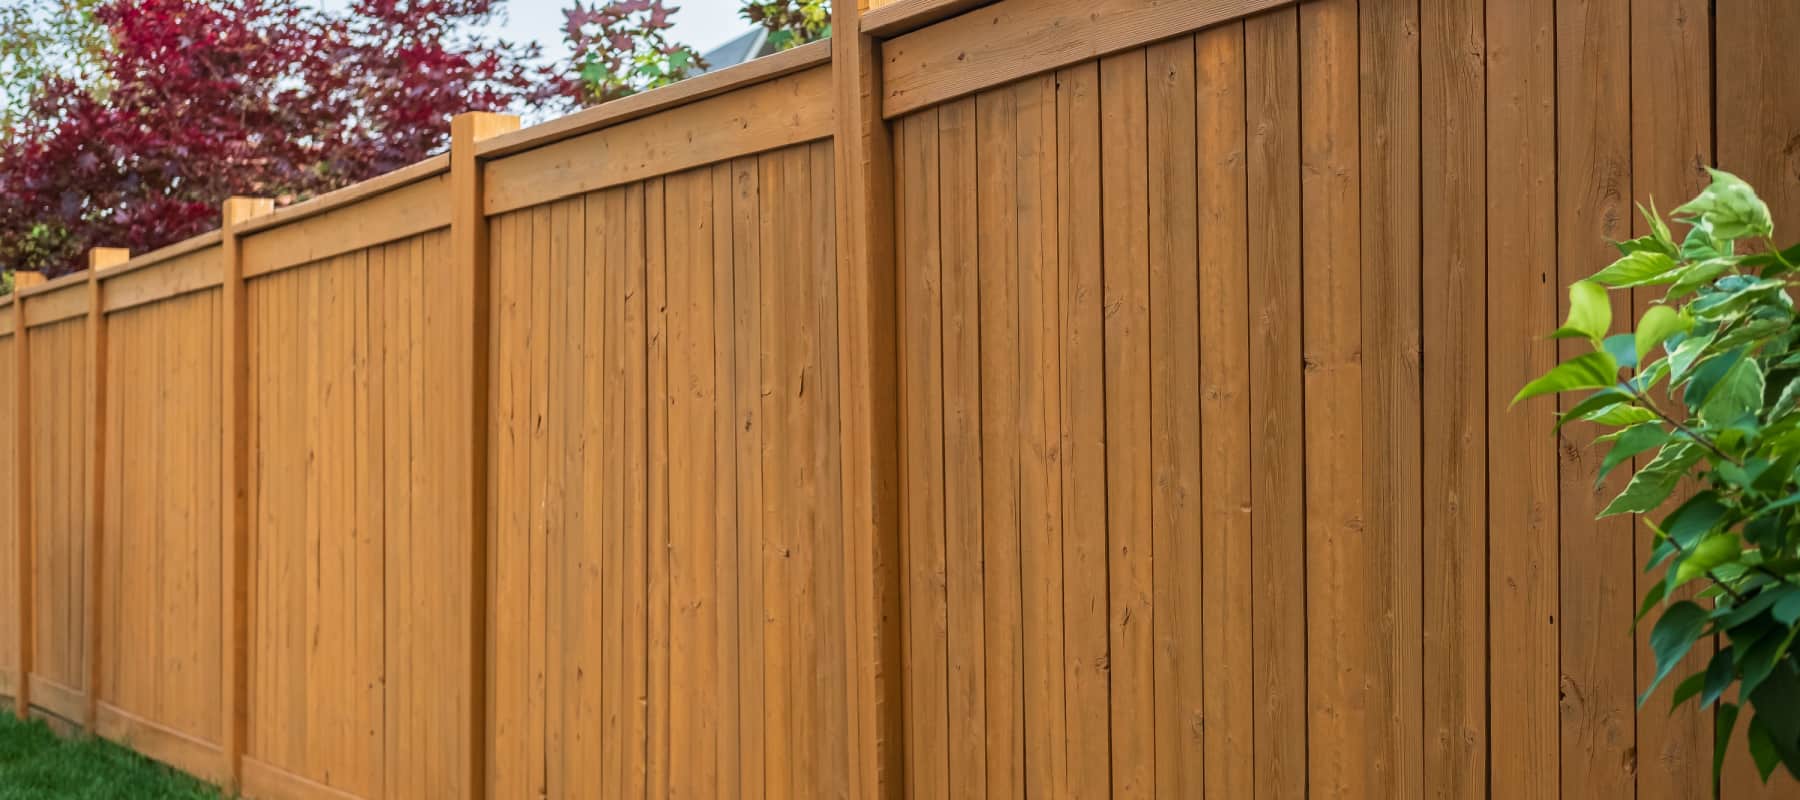 Image of a high-quality residential fence enhancing property aesthetics and providing security